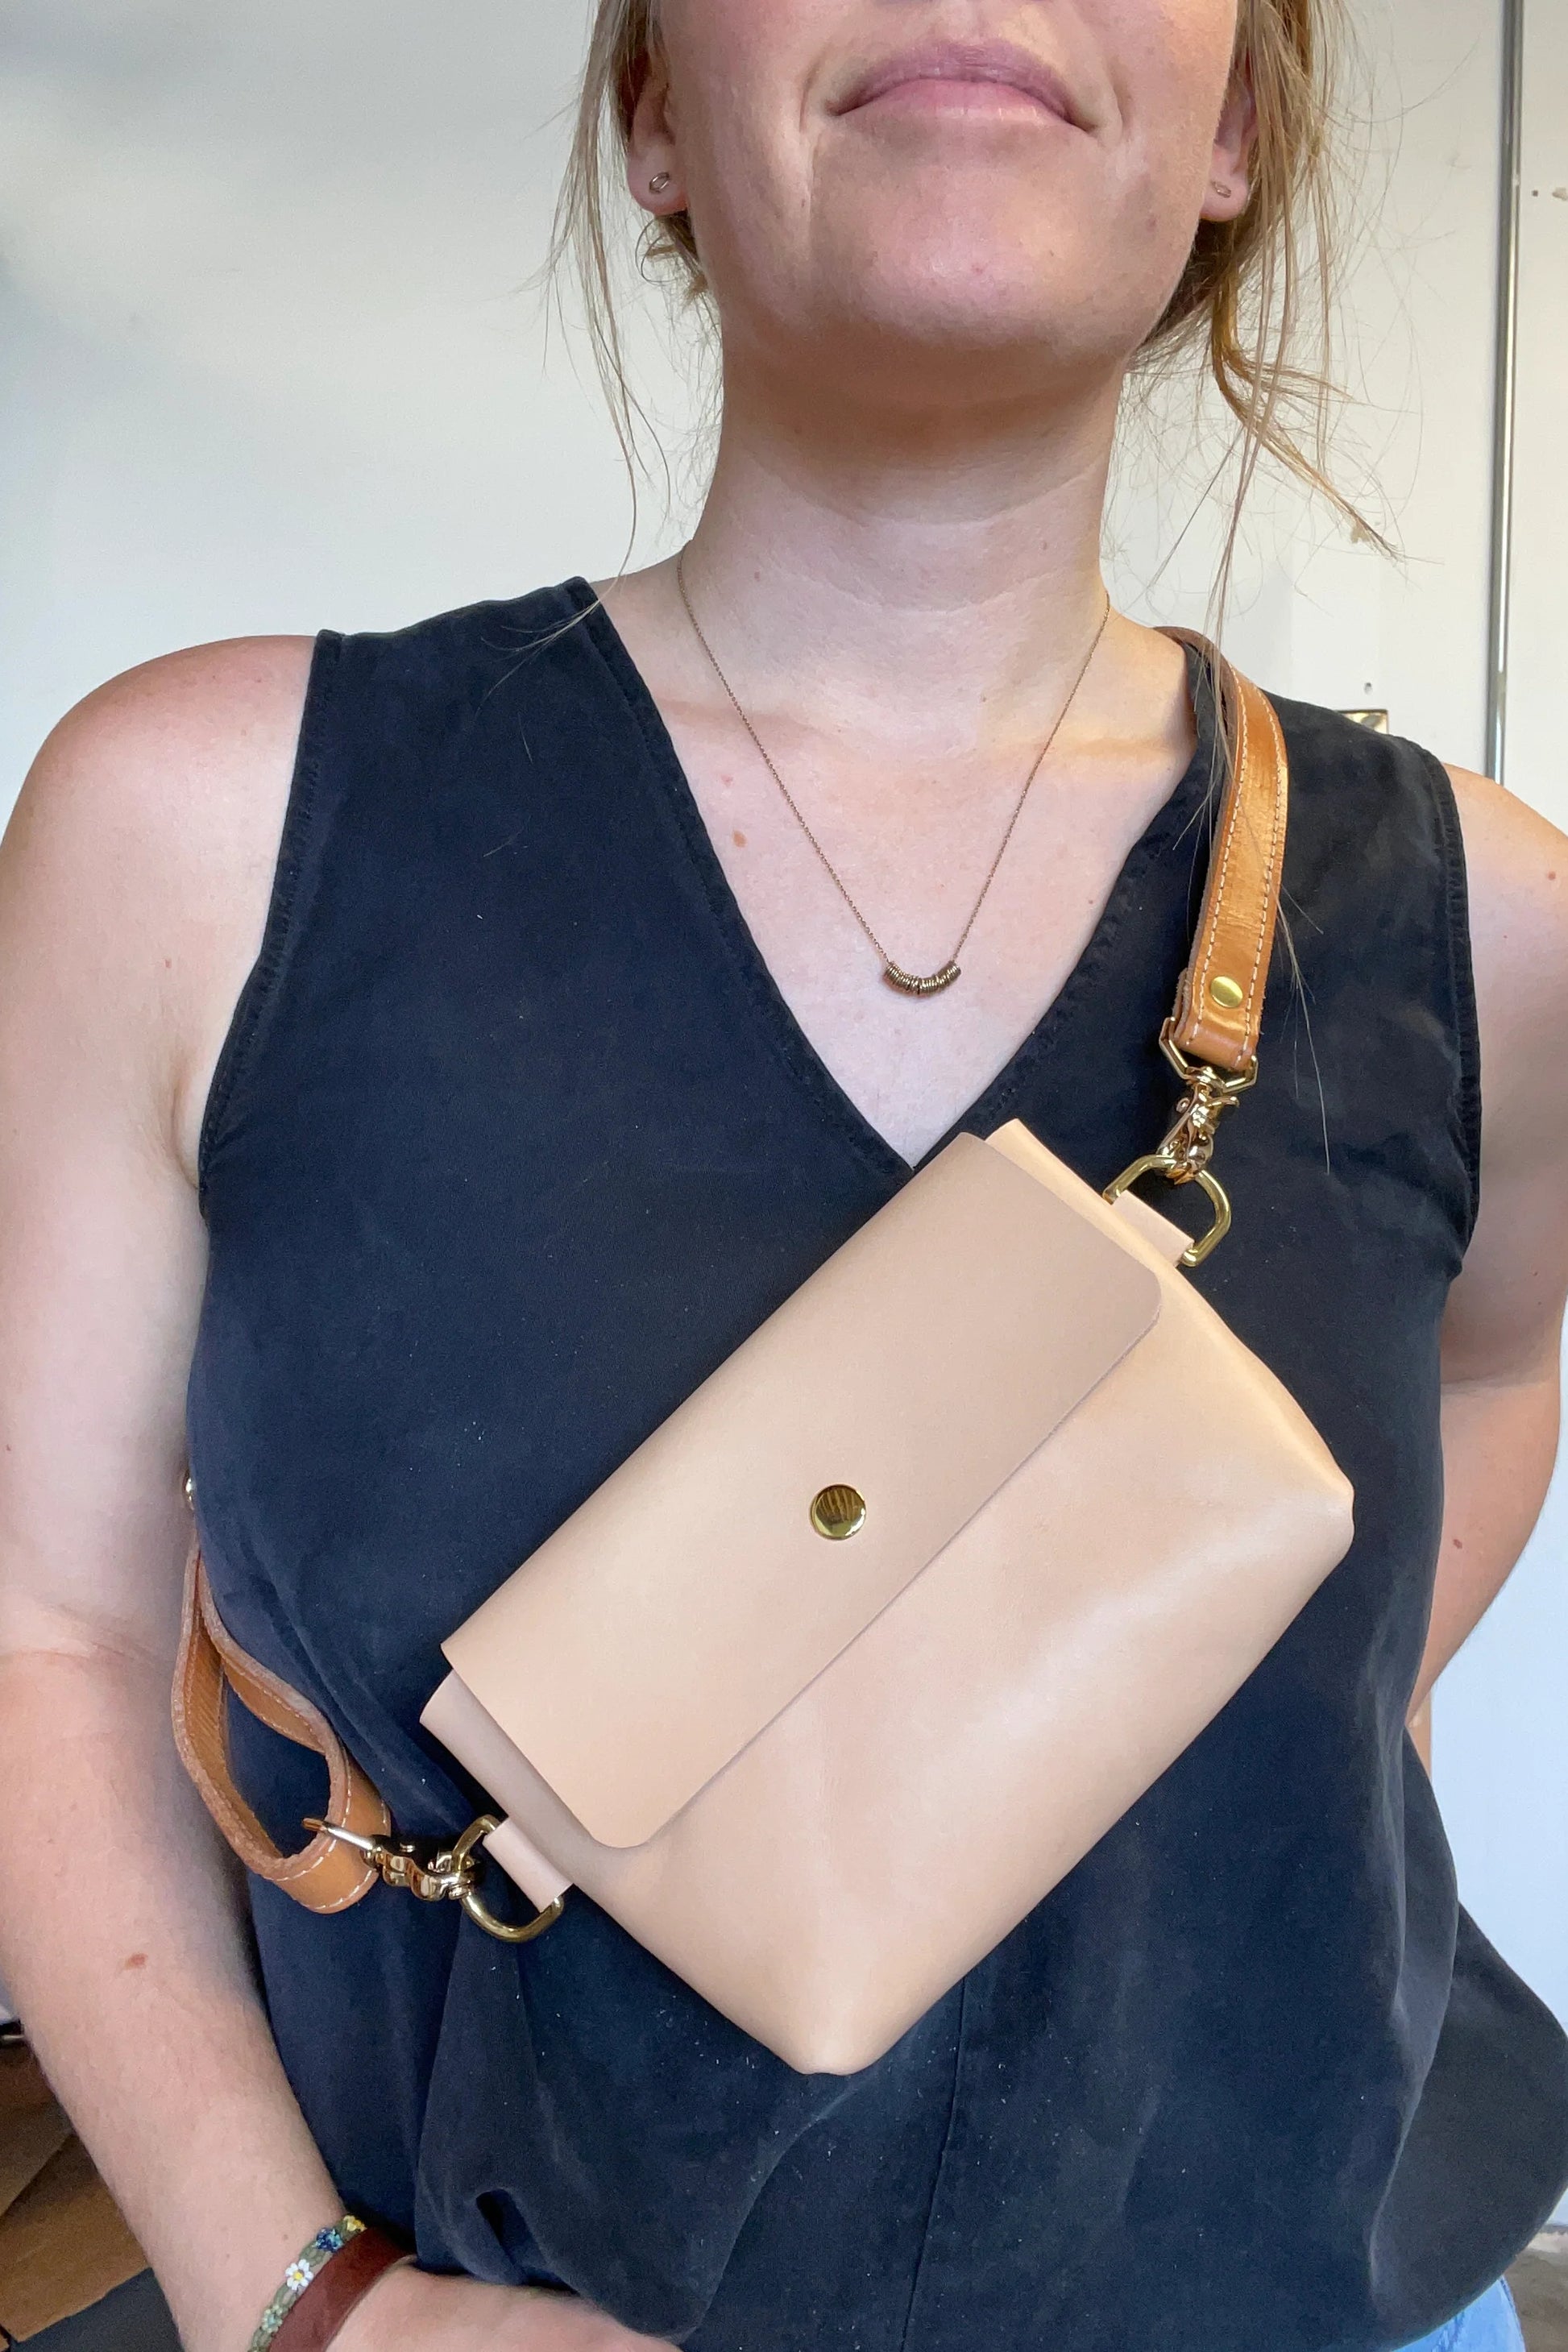 WEATHER & STORY - Natural Un-dyed Vegetable Tanned Smooth Leather Sling Bag with Brass Hardware - Handmade in Austin, Texas, USA